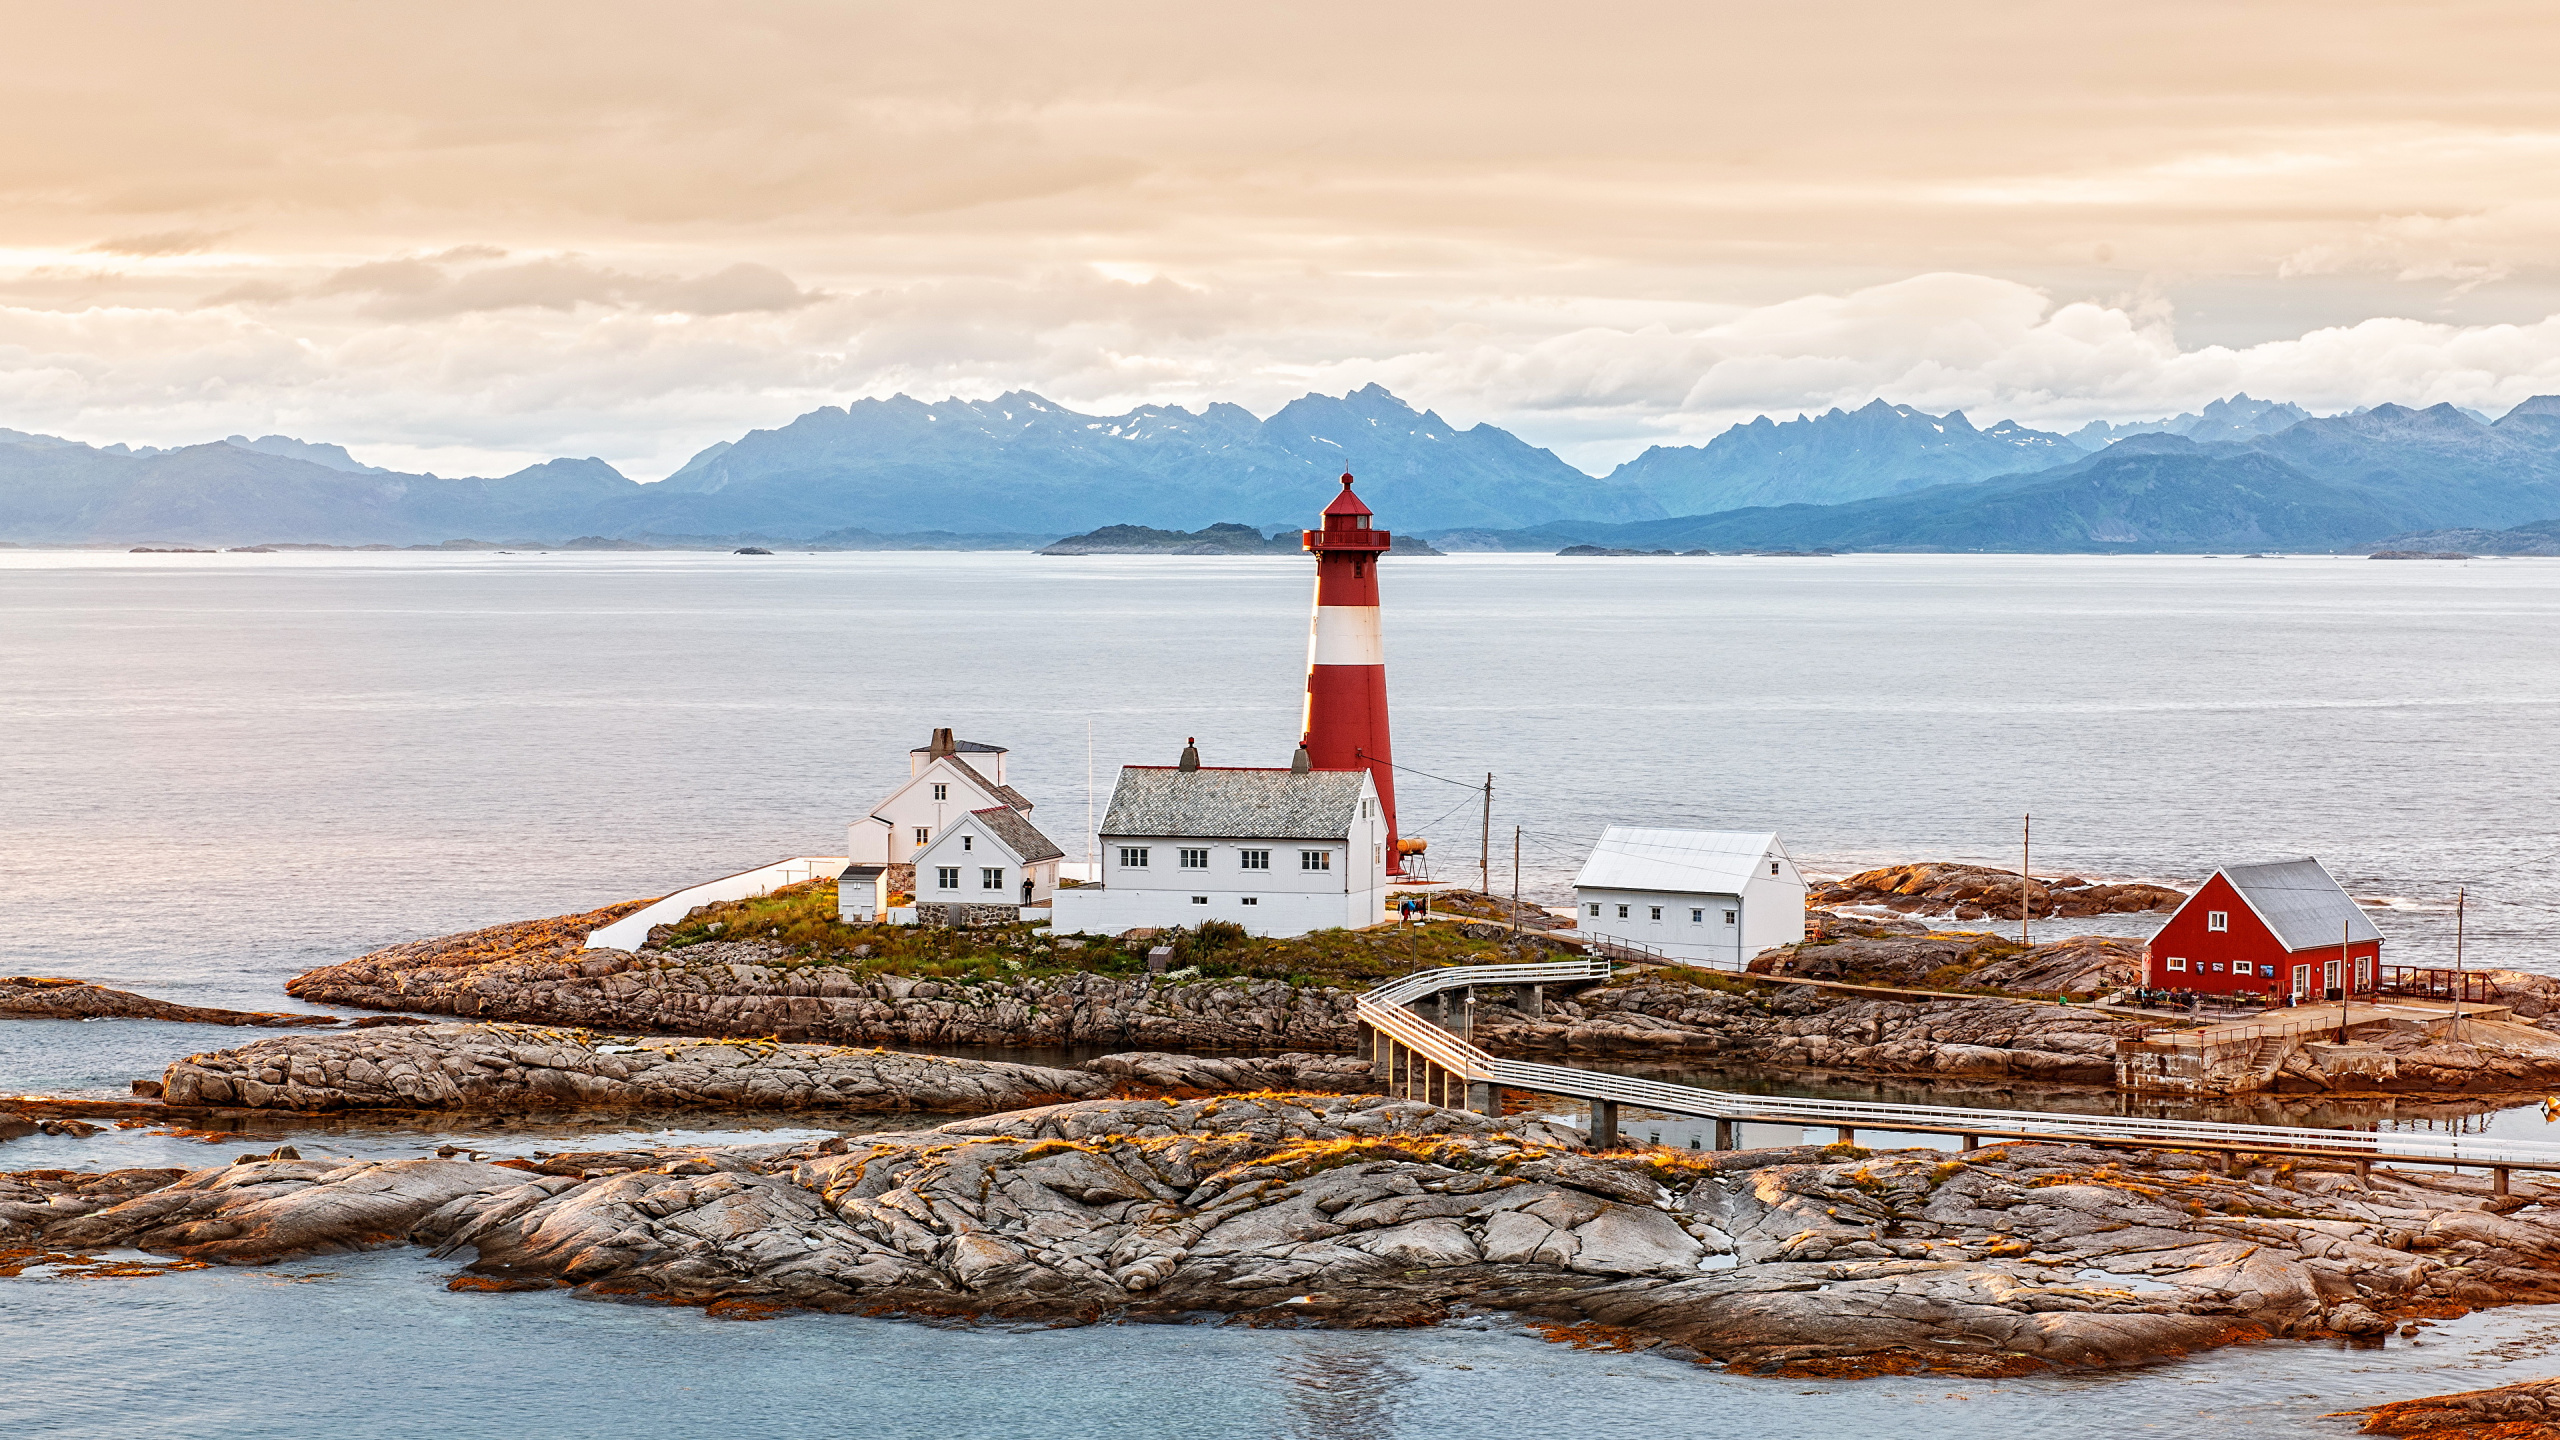 White and Red Lighthouse Near Body of Water During Daytime. Wallpaper in 2560x1440 Resolution